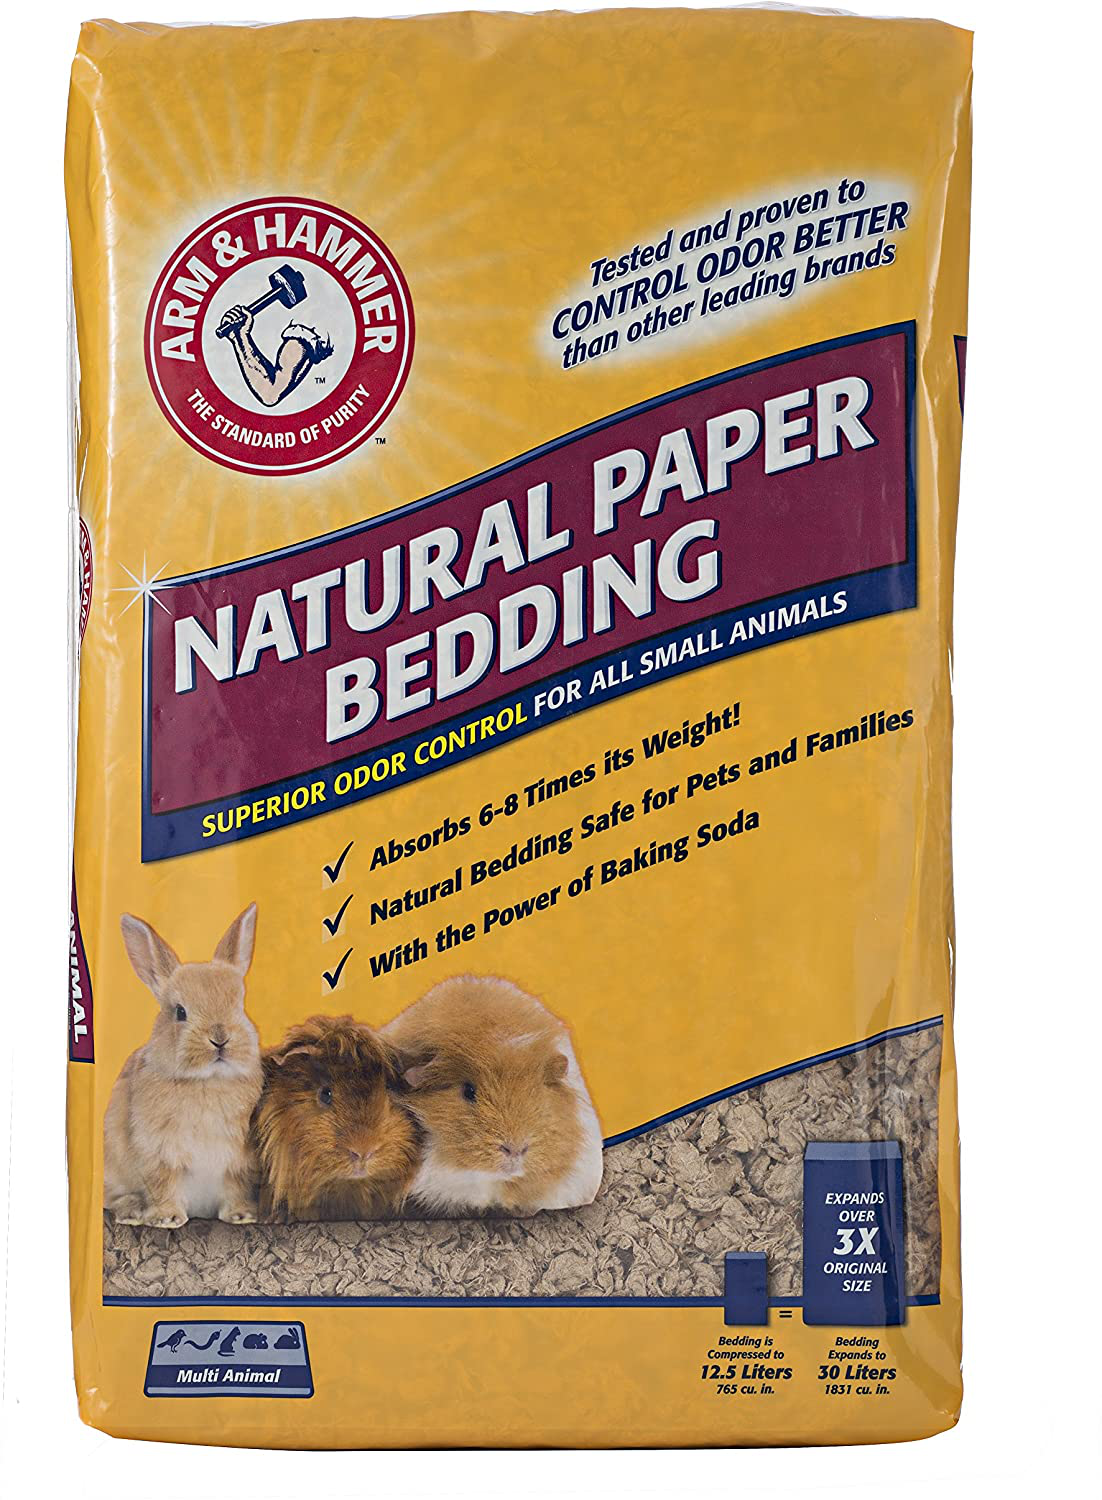 Arm & Hammer for Pets Natural Paper Bedding for Guinea Pigs, Hamsters, Rabbits & All Small Animals-Expandable Paper Bedding for Small Animals-Hamster Bedding, Guinea Pig Bedding, Bedding for Rabbits